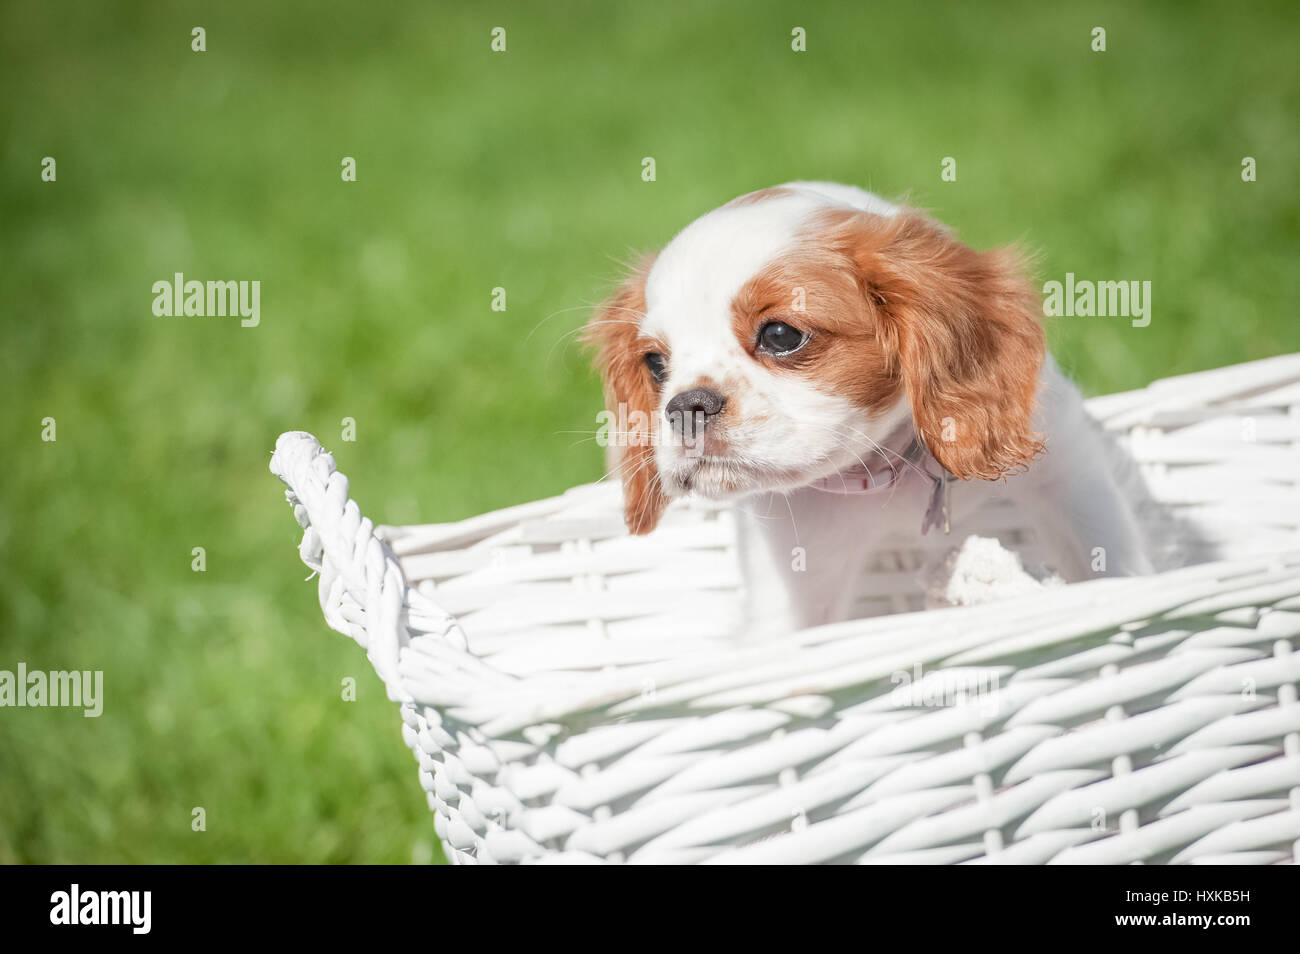 Cavalier King Charles Spaniel puppy in a basket Stock Photo